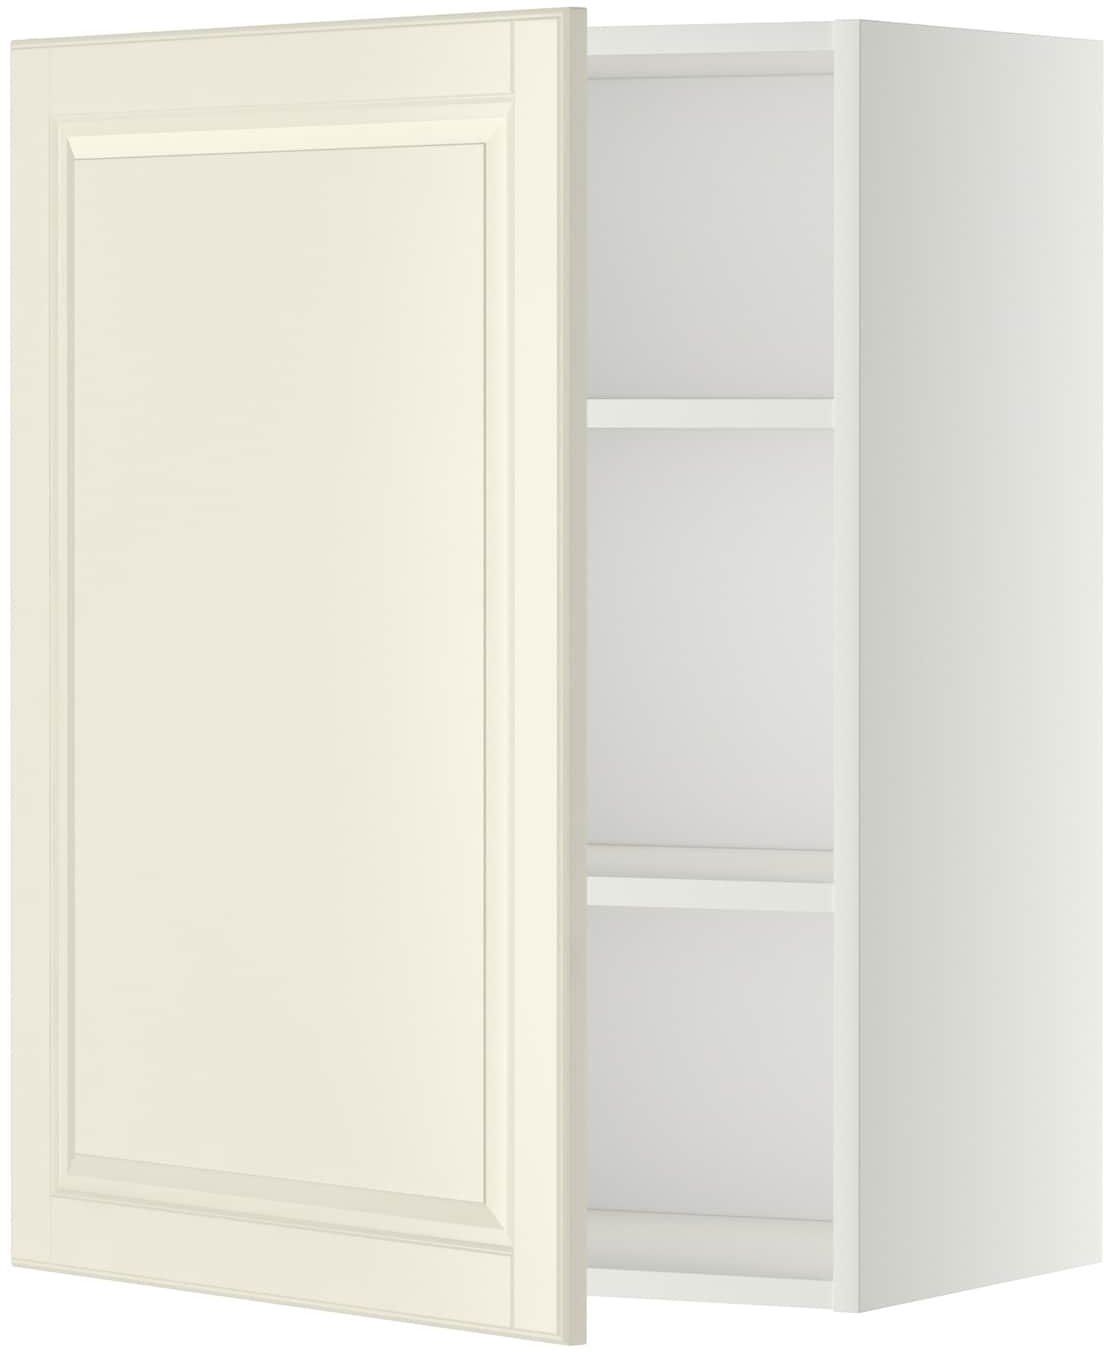 METOD Wall cabinet with shelves - white/Bodbyn off-white 60x80 cm